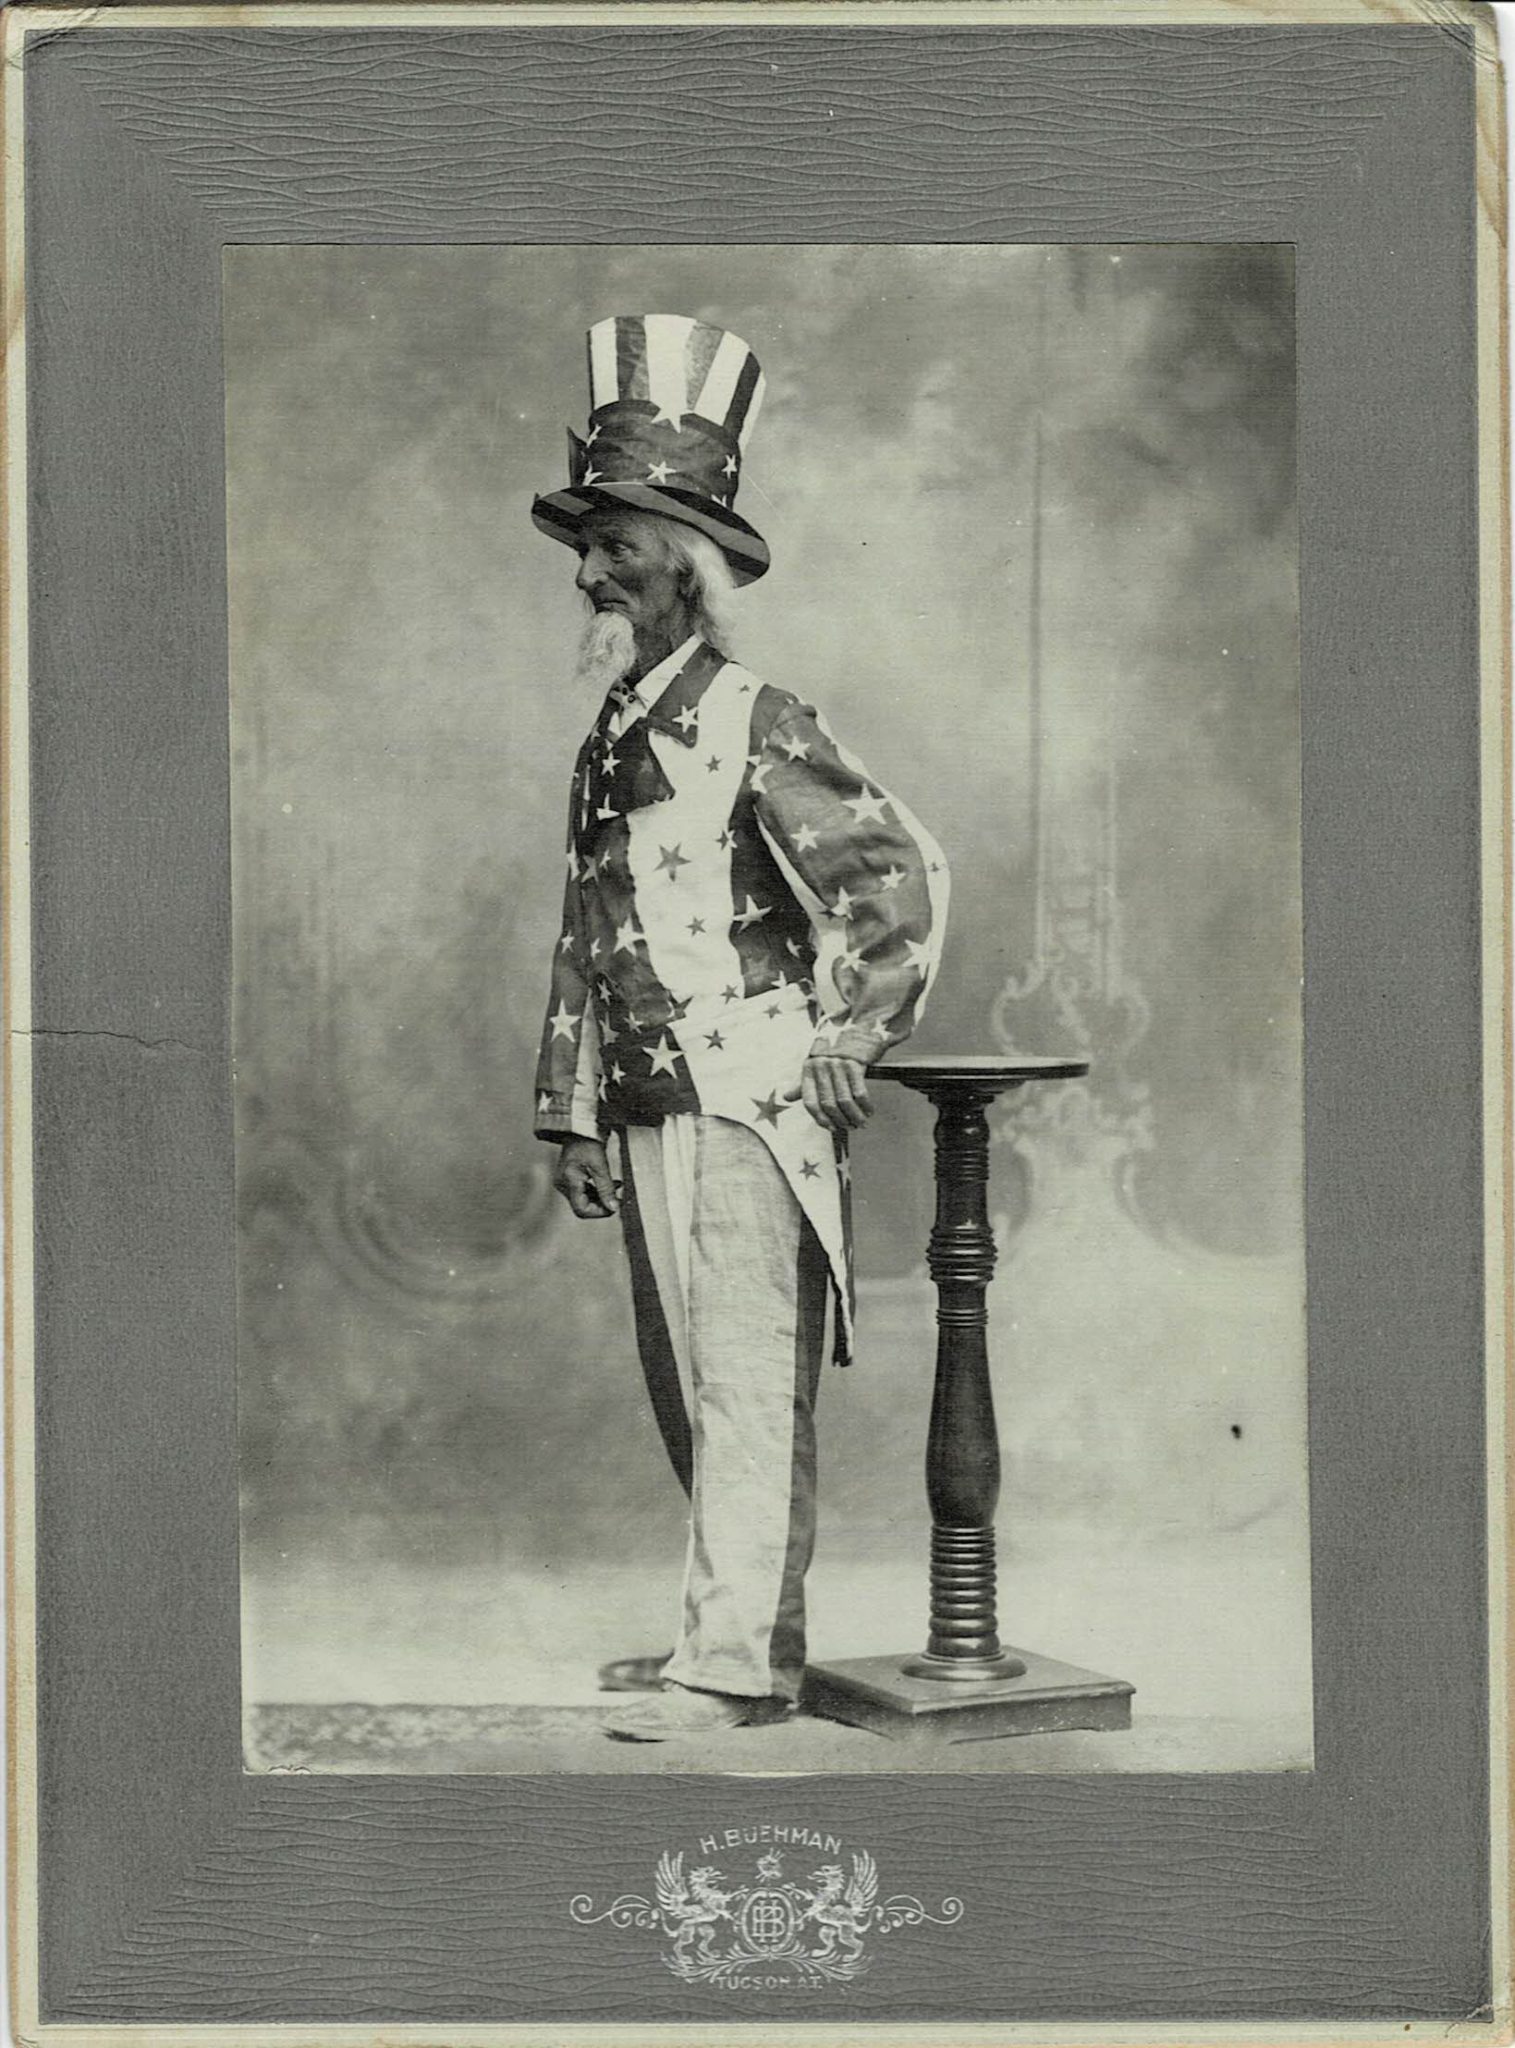 William Smith dressed as Uncle Sam (Henry Buehman Tucson Photographer)